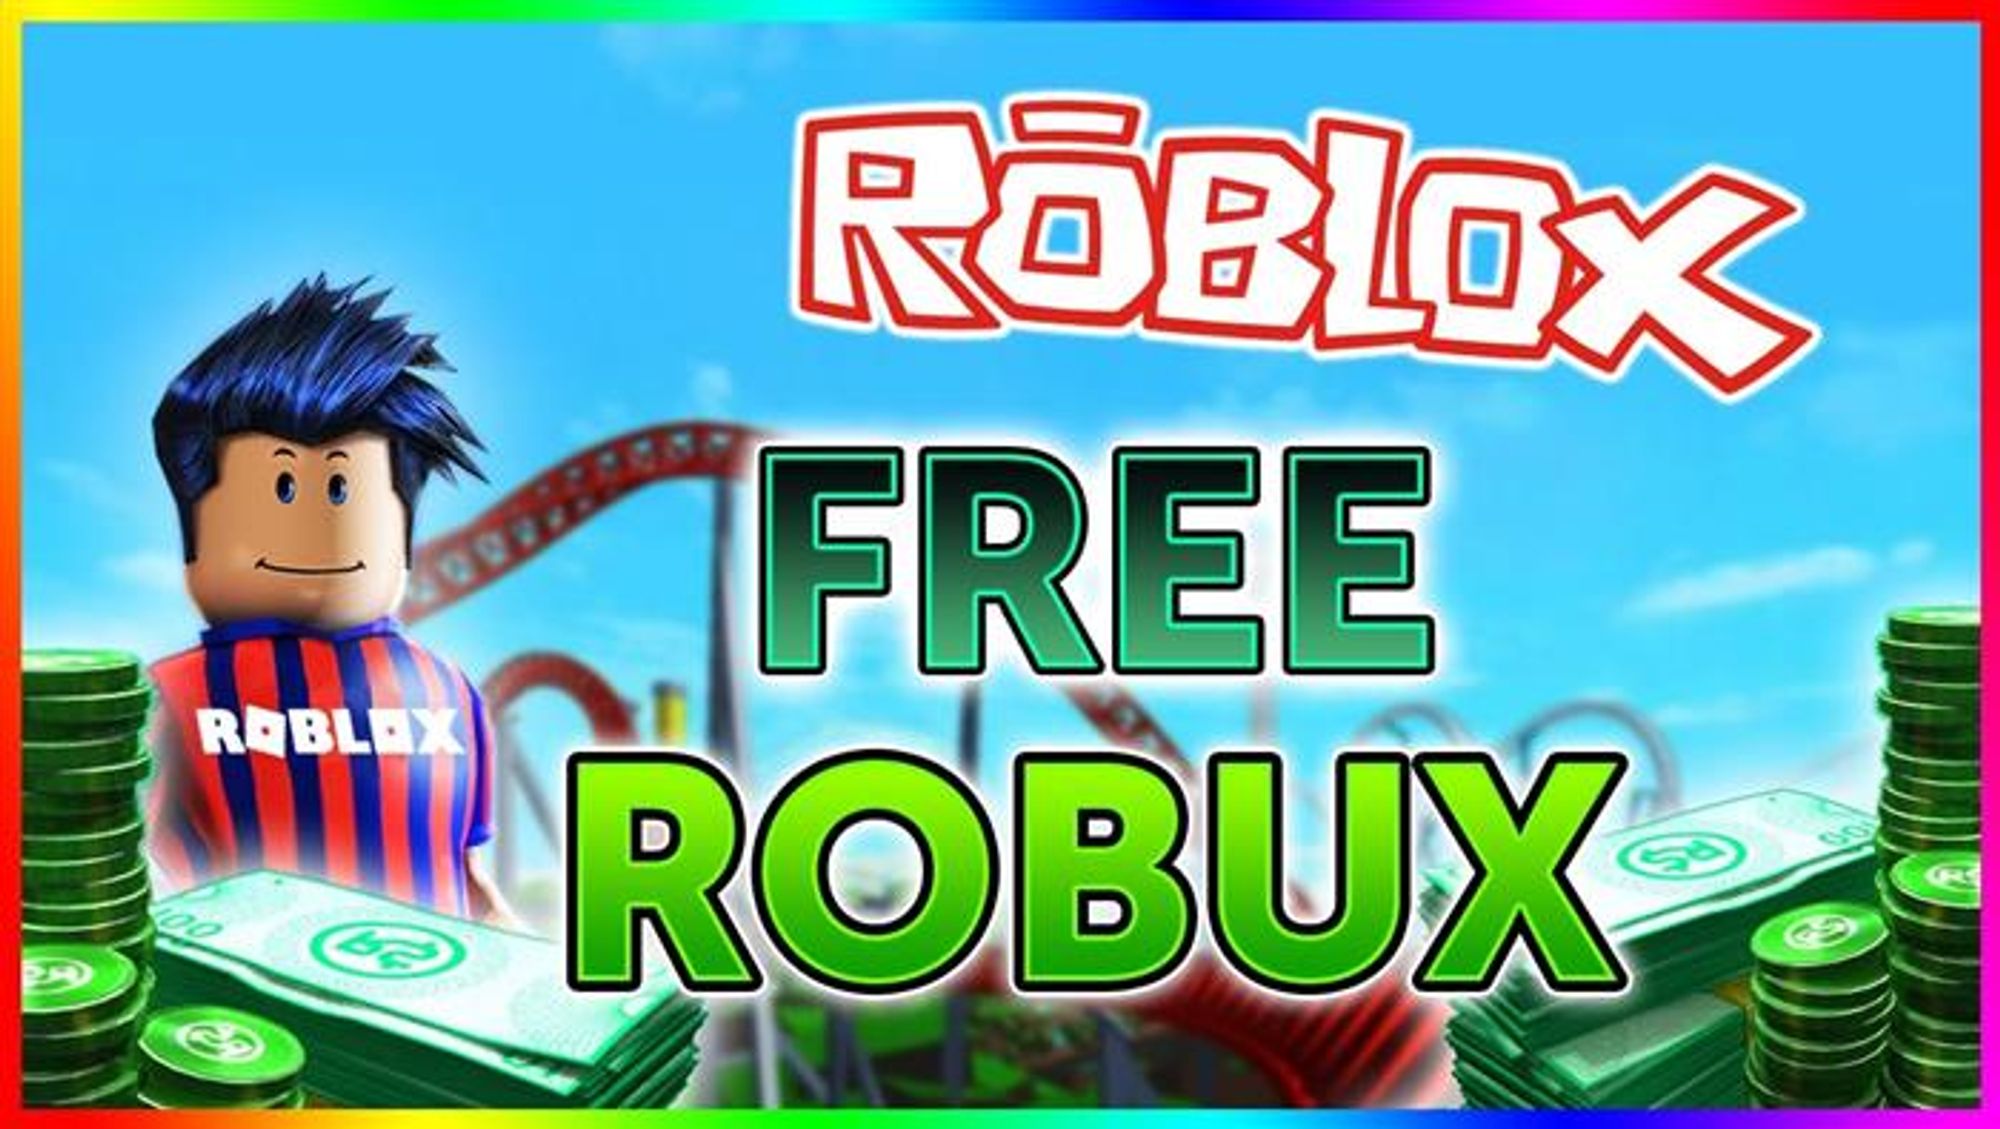 How To Get Robux In Roblox 2018